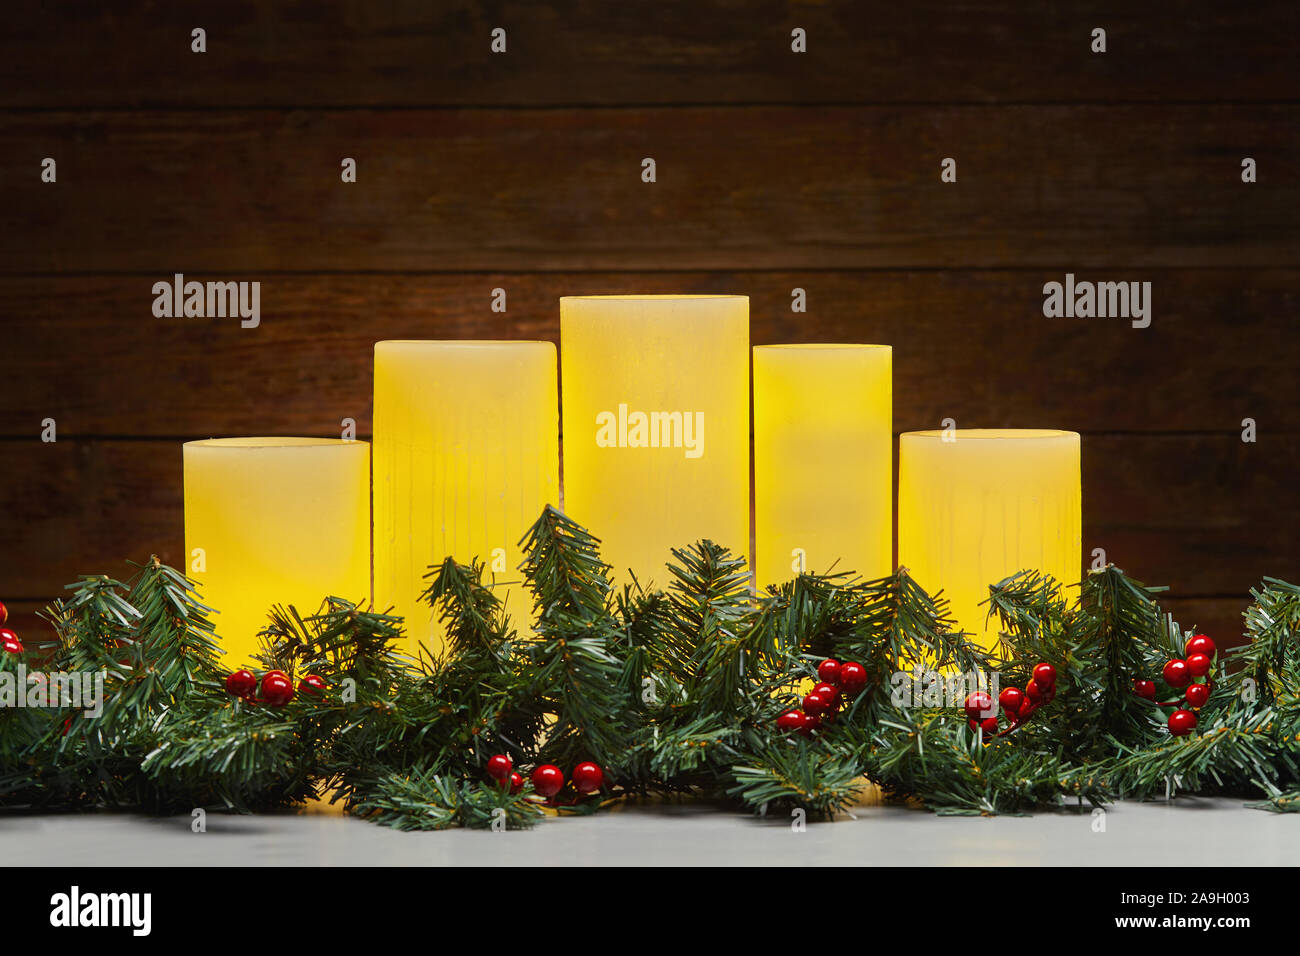 Christmas holiday still life of glowing yellow electric candles and green garland with holly berries Stock Photo